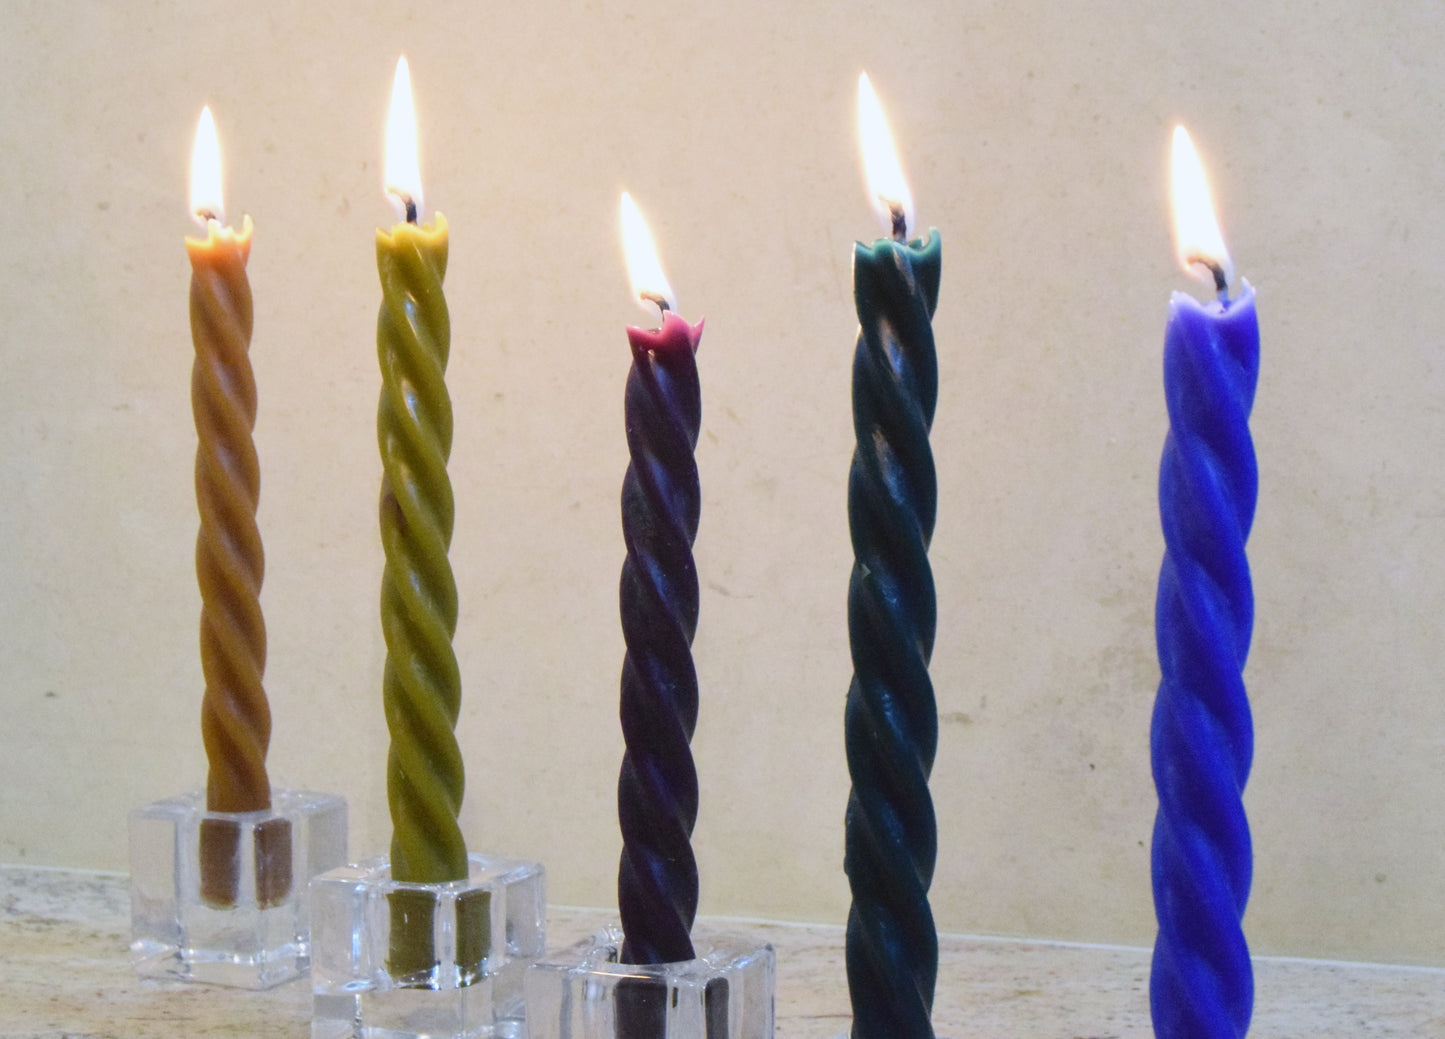 2 x Handmade Colorful Beeswax Twisted Taper Candles